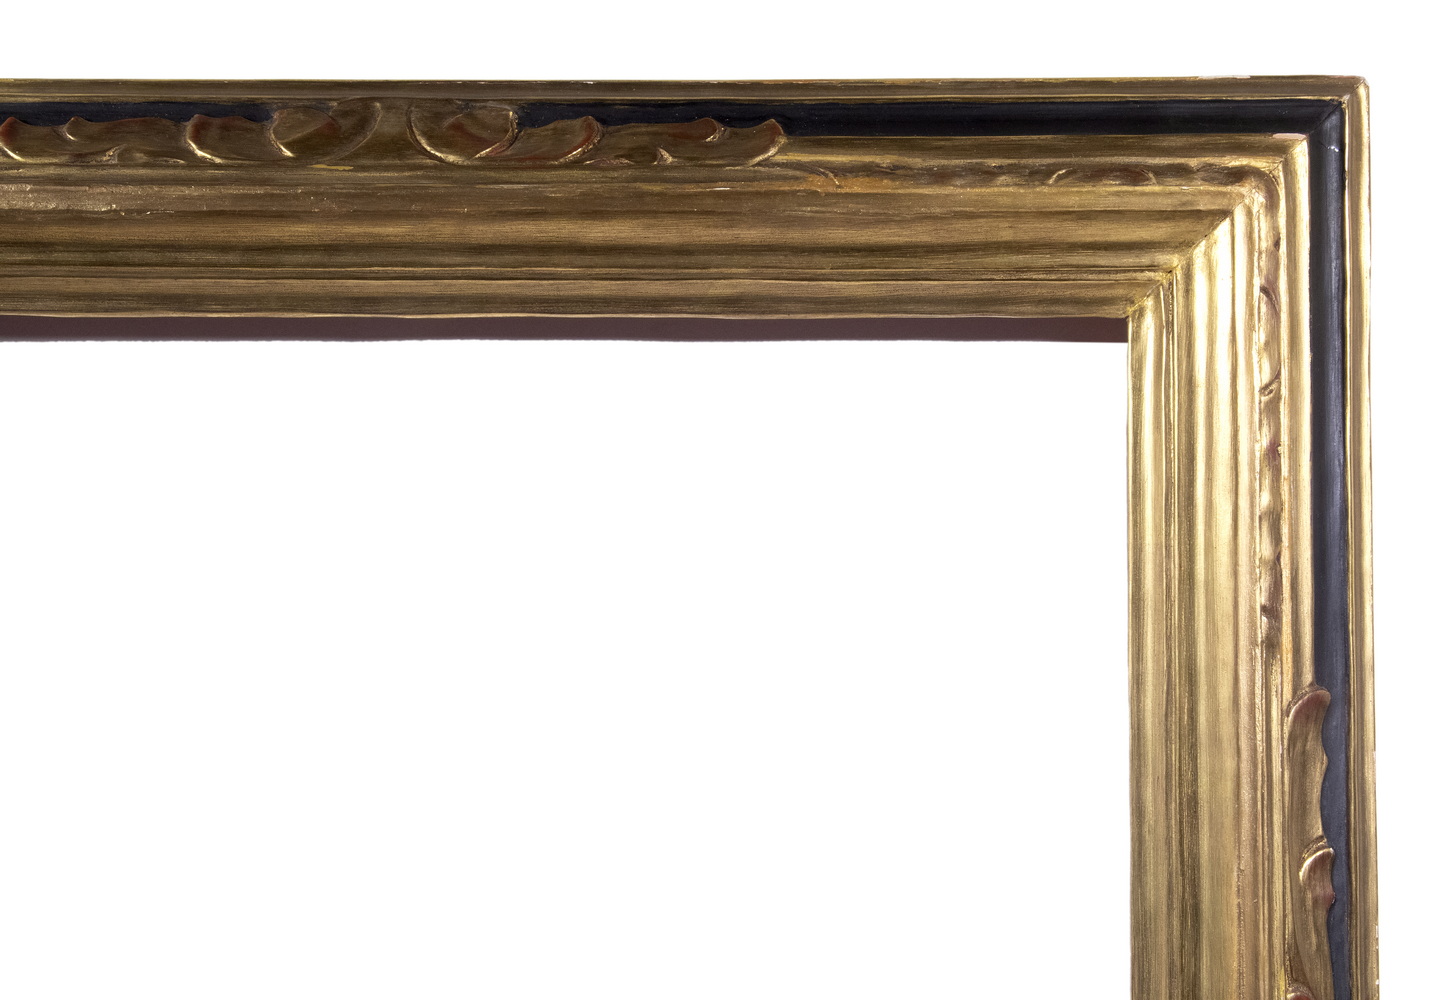 HANDCARVED FRAME BY THULIN Scrollwork